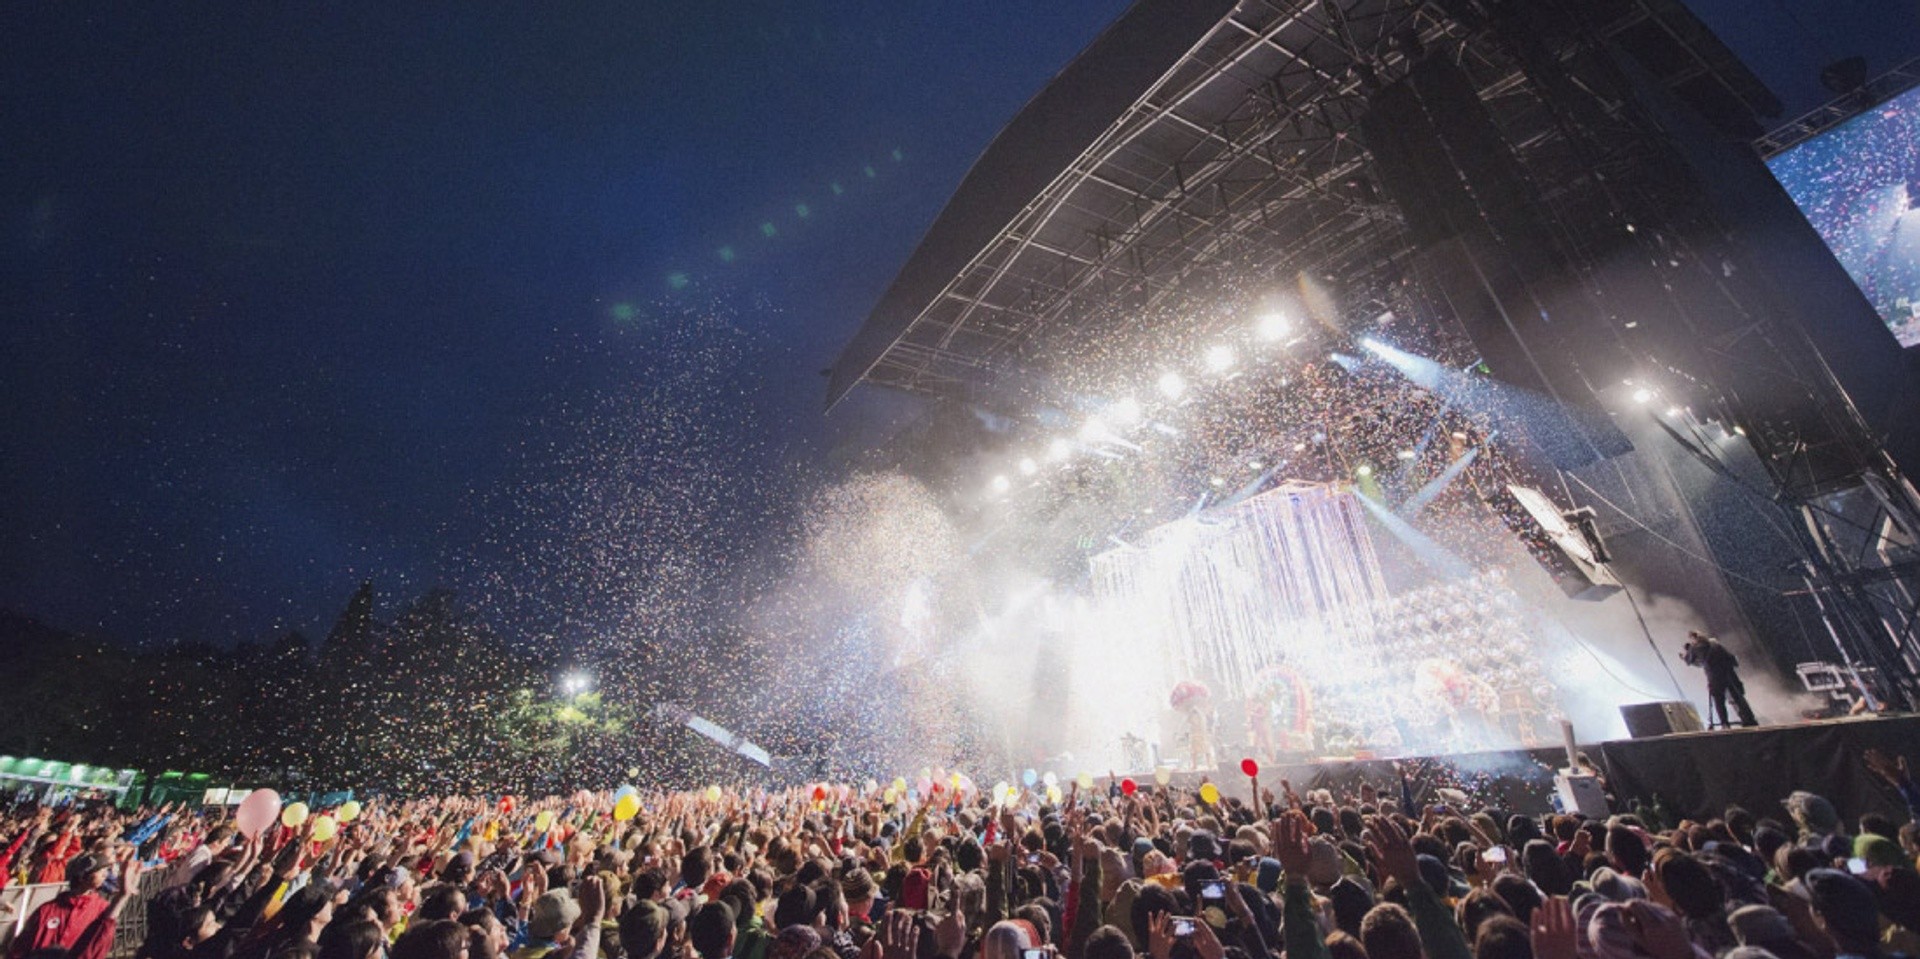 Red Hot Chili Peppers, Sigur Ros, Disclosure and more confirmed for Fuji Rock Festival